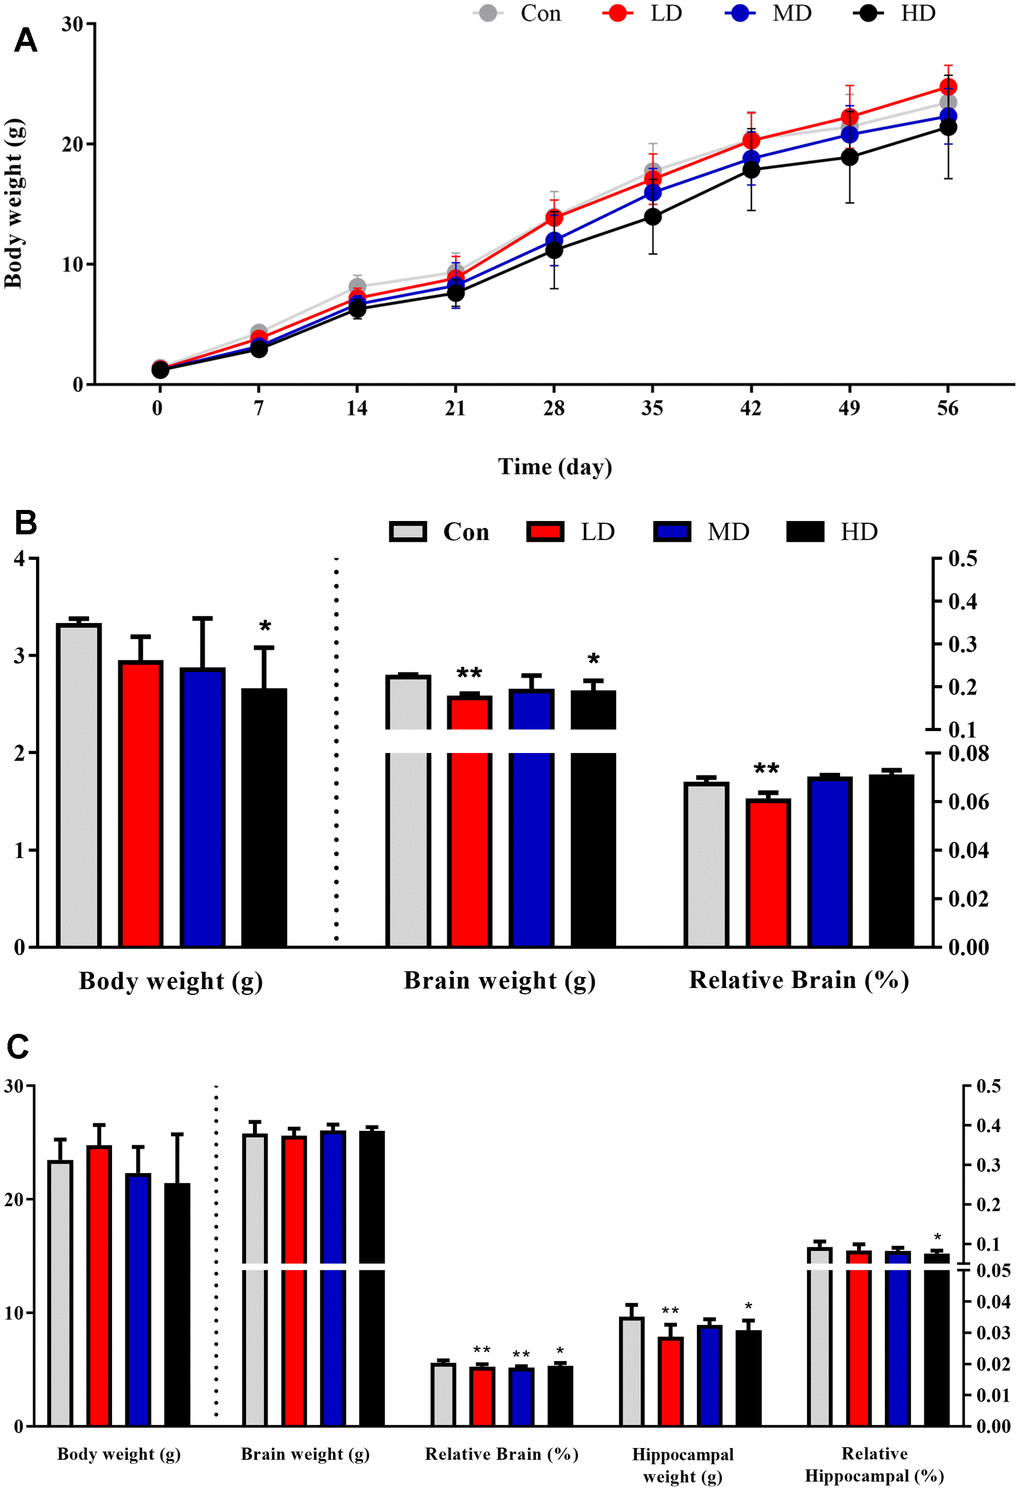 Body weight and organ weight of male offspring after prenatal DEPs exposure. (A) The body weight of male offspring. (B) The body weight, brain weight and relative brain of 7 days male offspring. (C) The body weight, brain weight, relative brain, hippocampal weight and relative hippocampal of 56 days male offspring. The values shown are the mean ± SD. Compared to control; * p p 